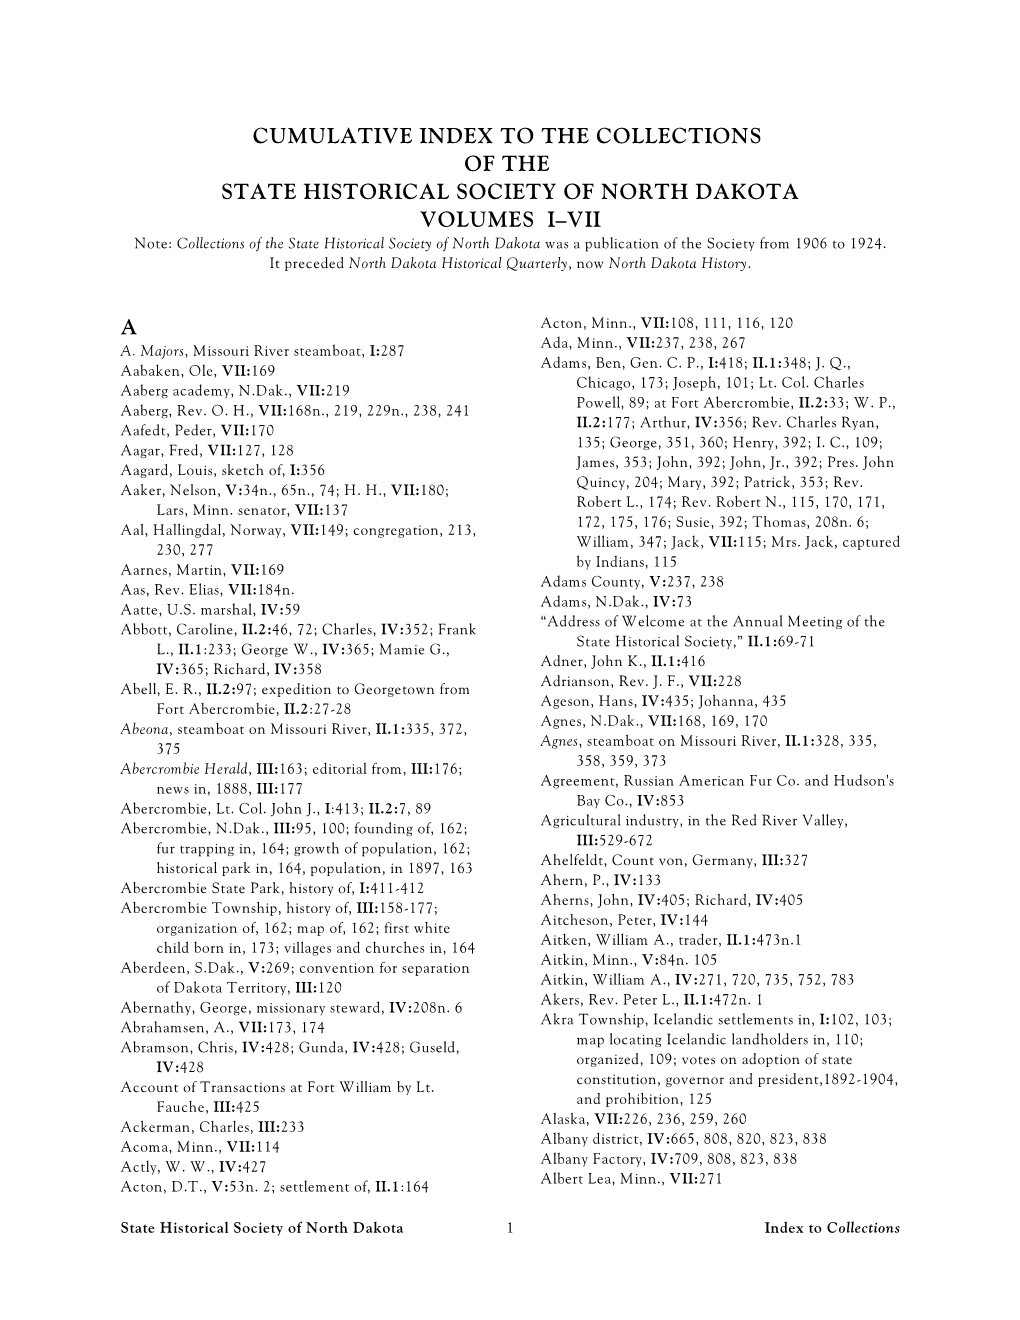 Cumulative Index to the Collections of the State Historical Society of North